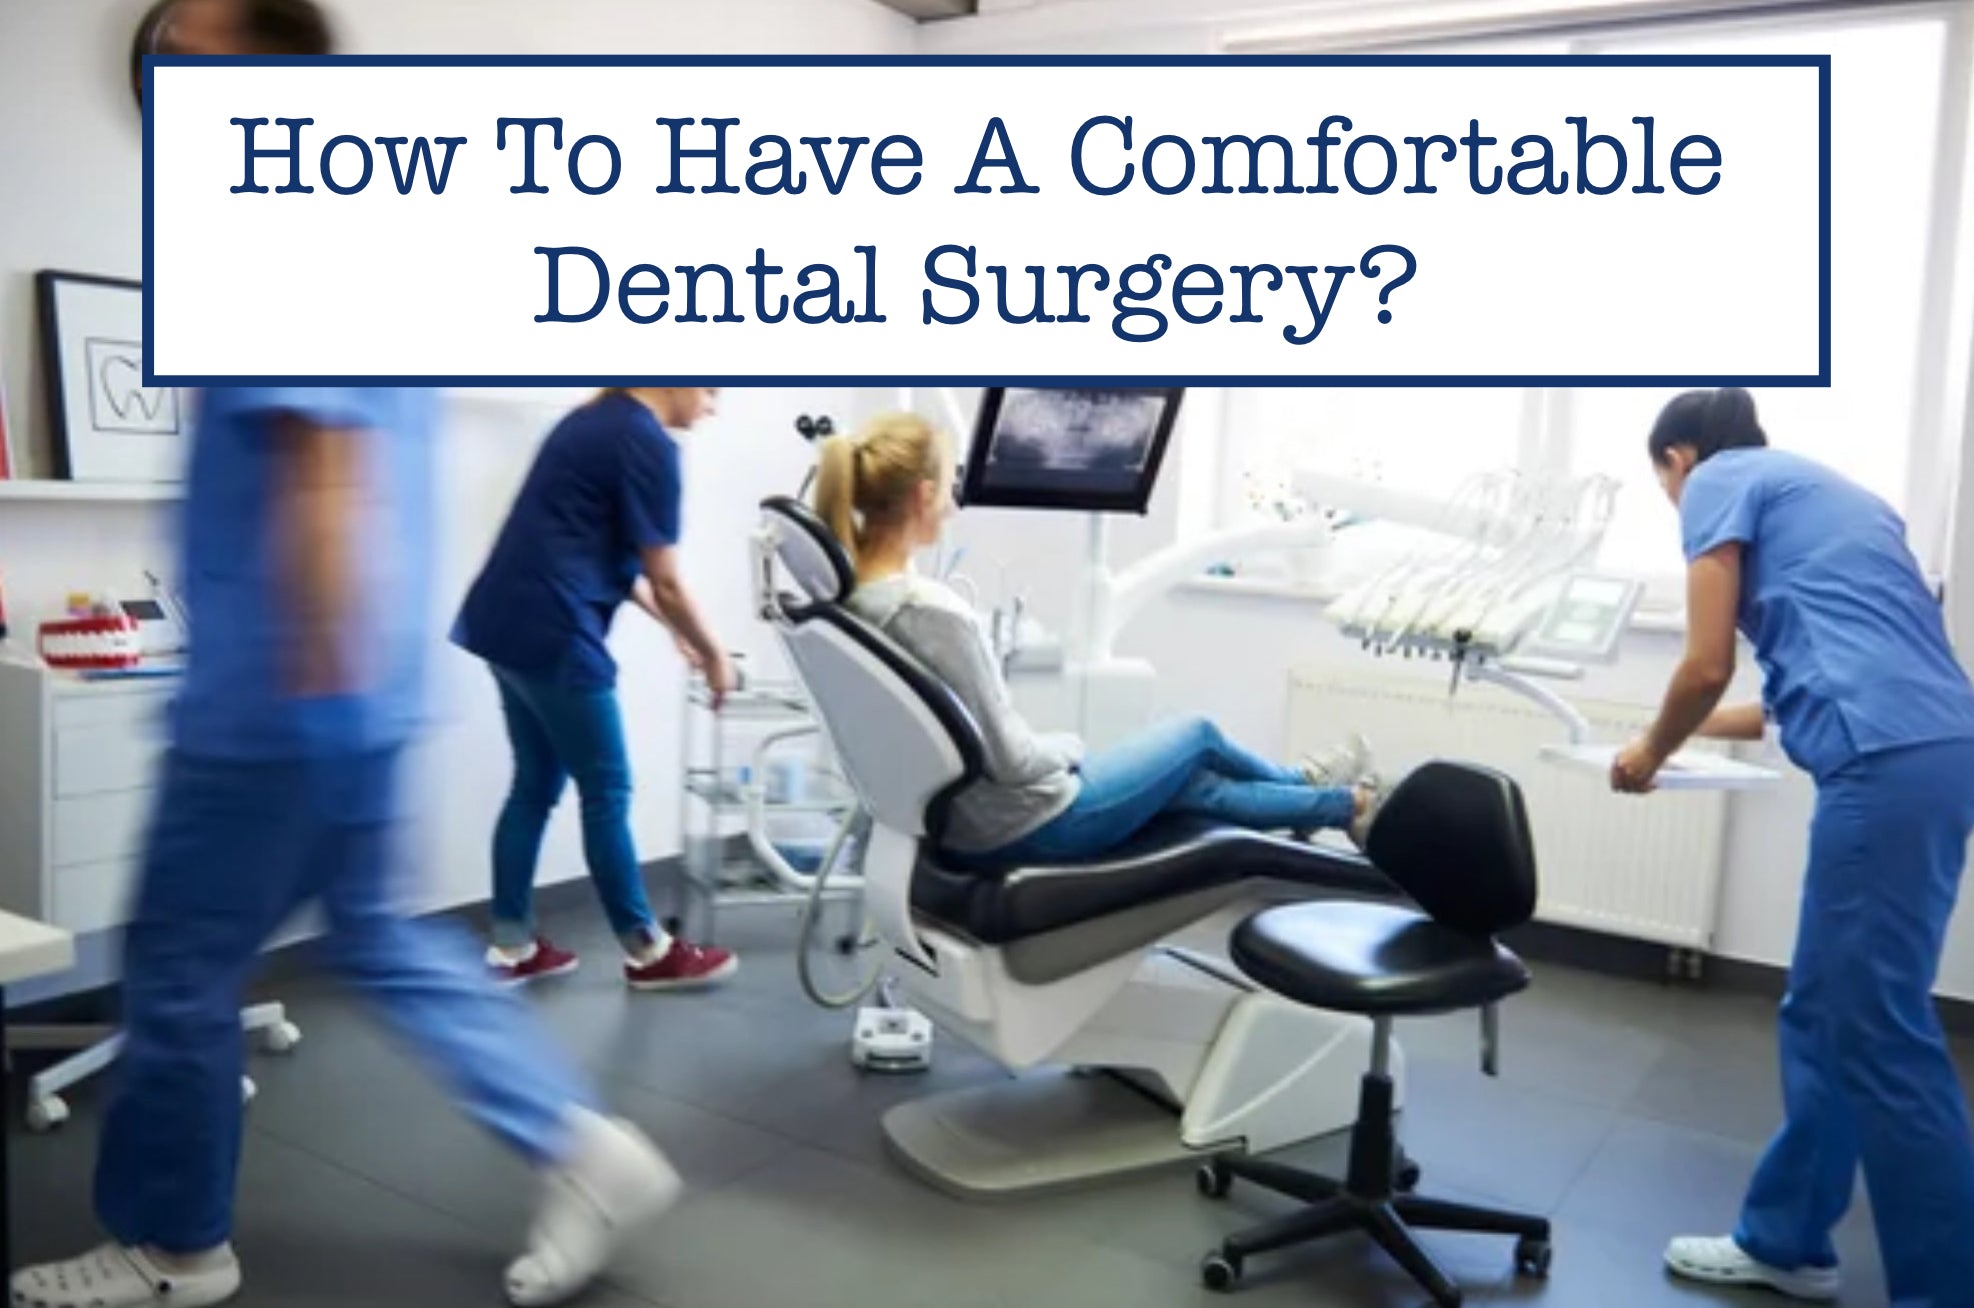 How To Have A Comfortable Dental Surgery?